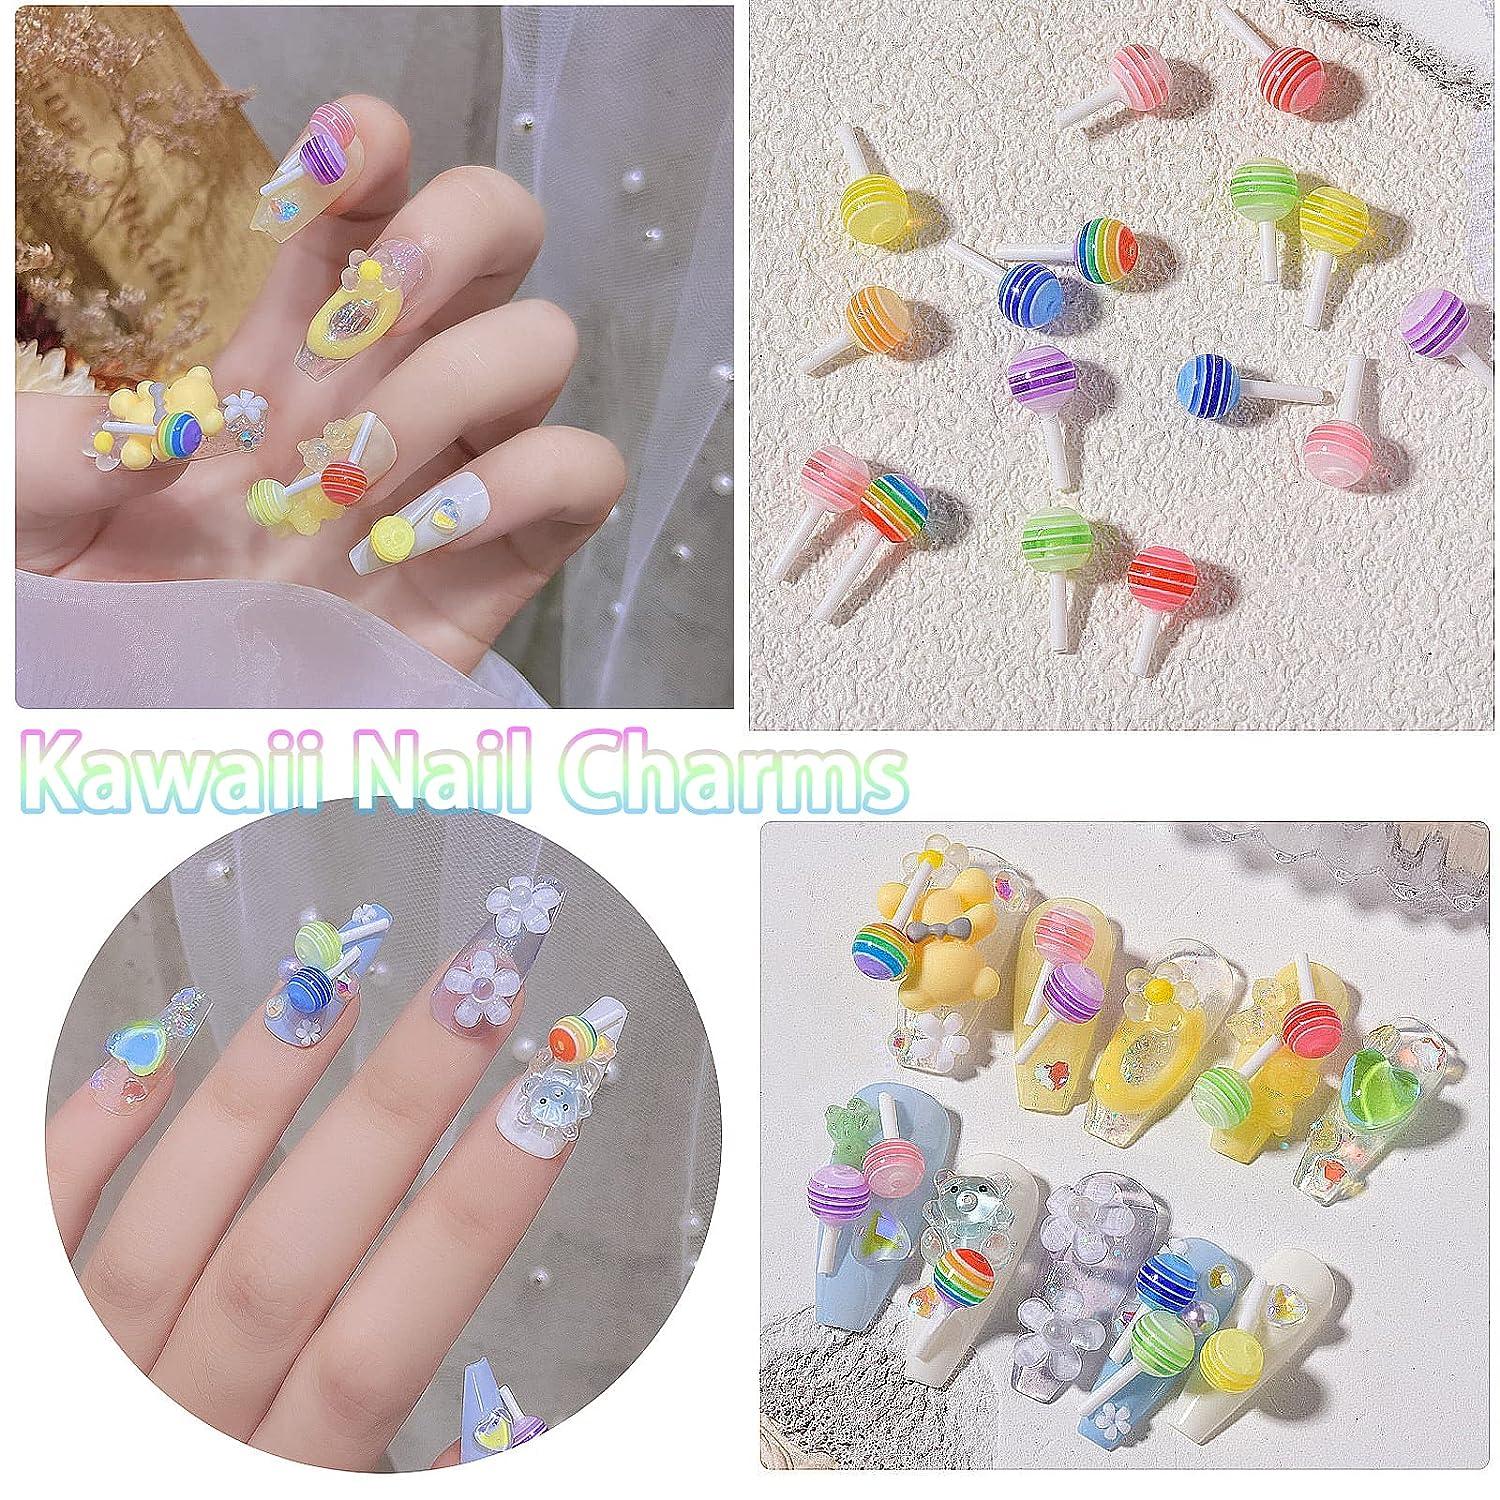 30PC Kawaii Resin Nail Art Charm Jelly Gummy Bear/ Lollipop Mix Sweet Candy  3D Nail Decorations Luxury For Nails Design E1005(1)